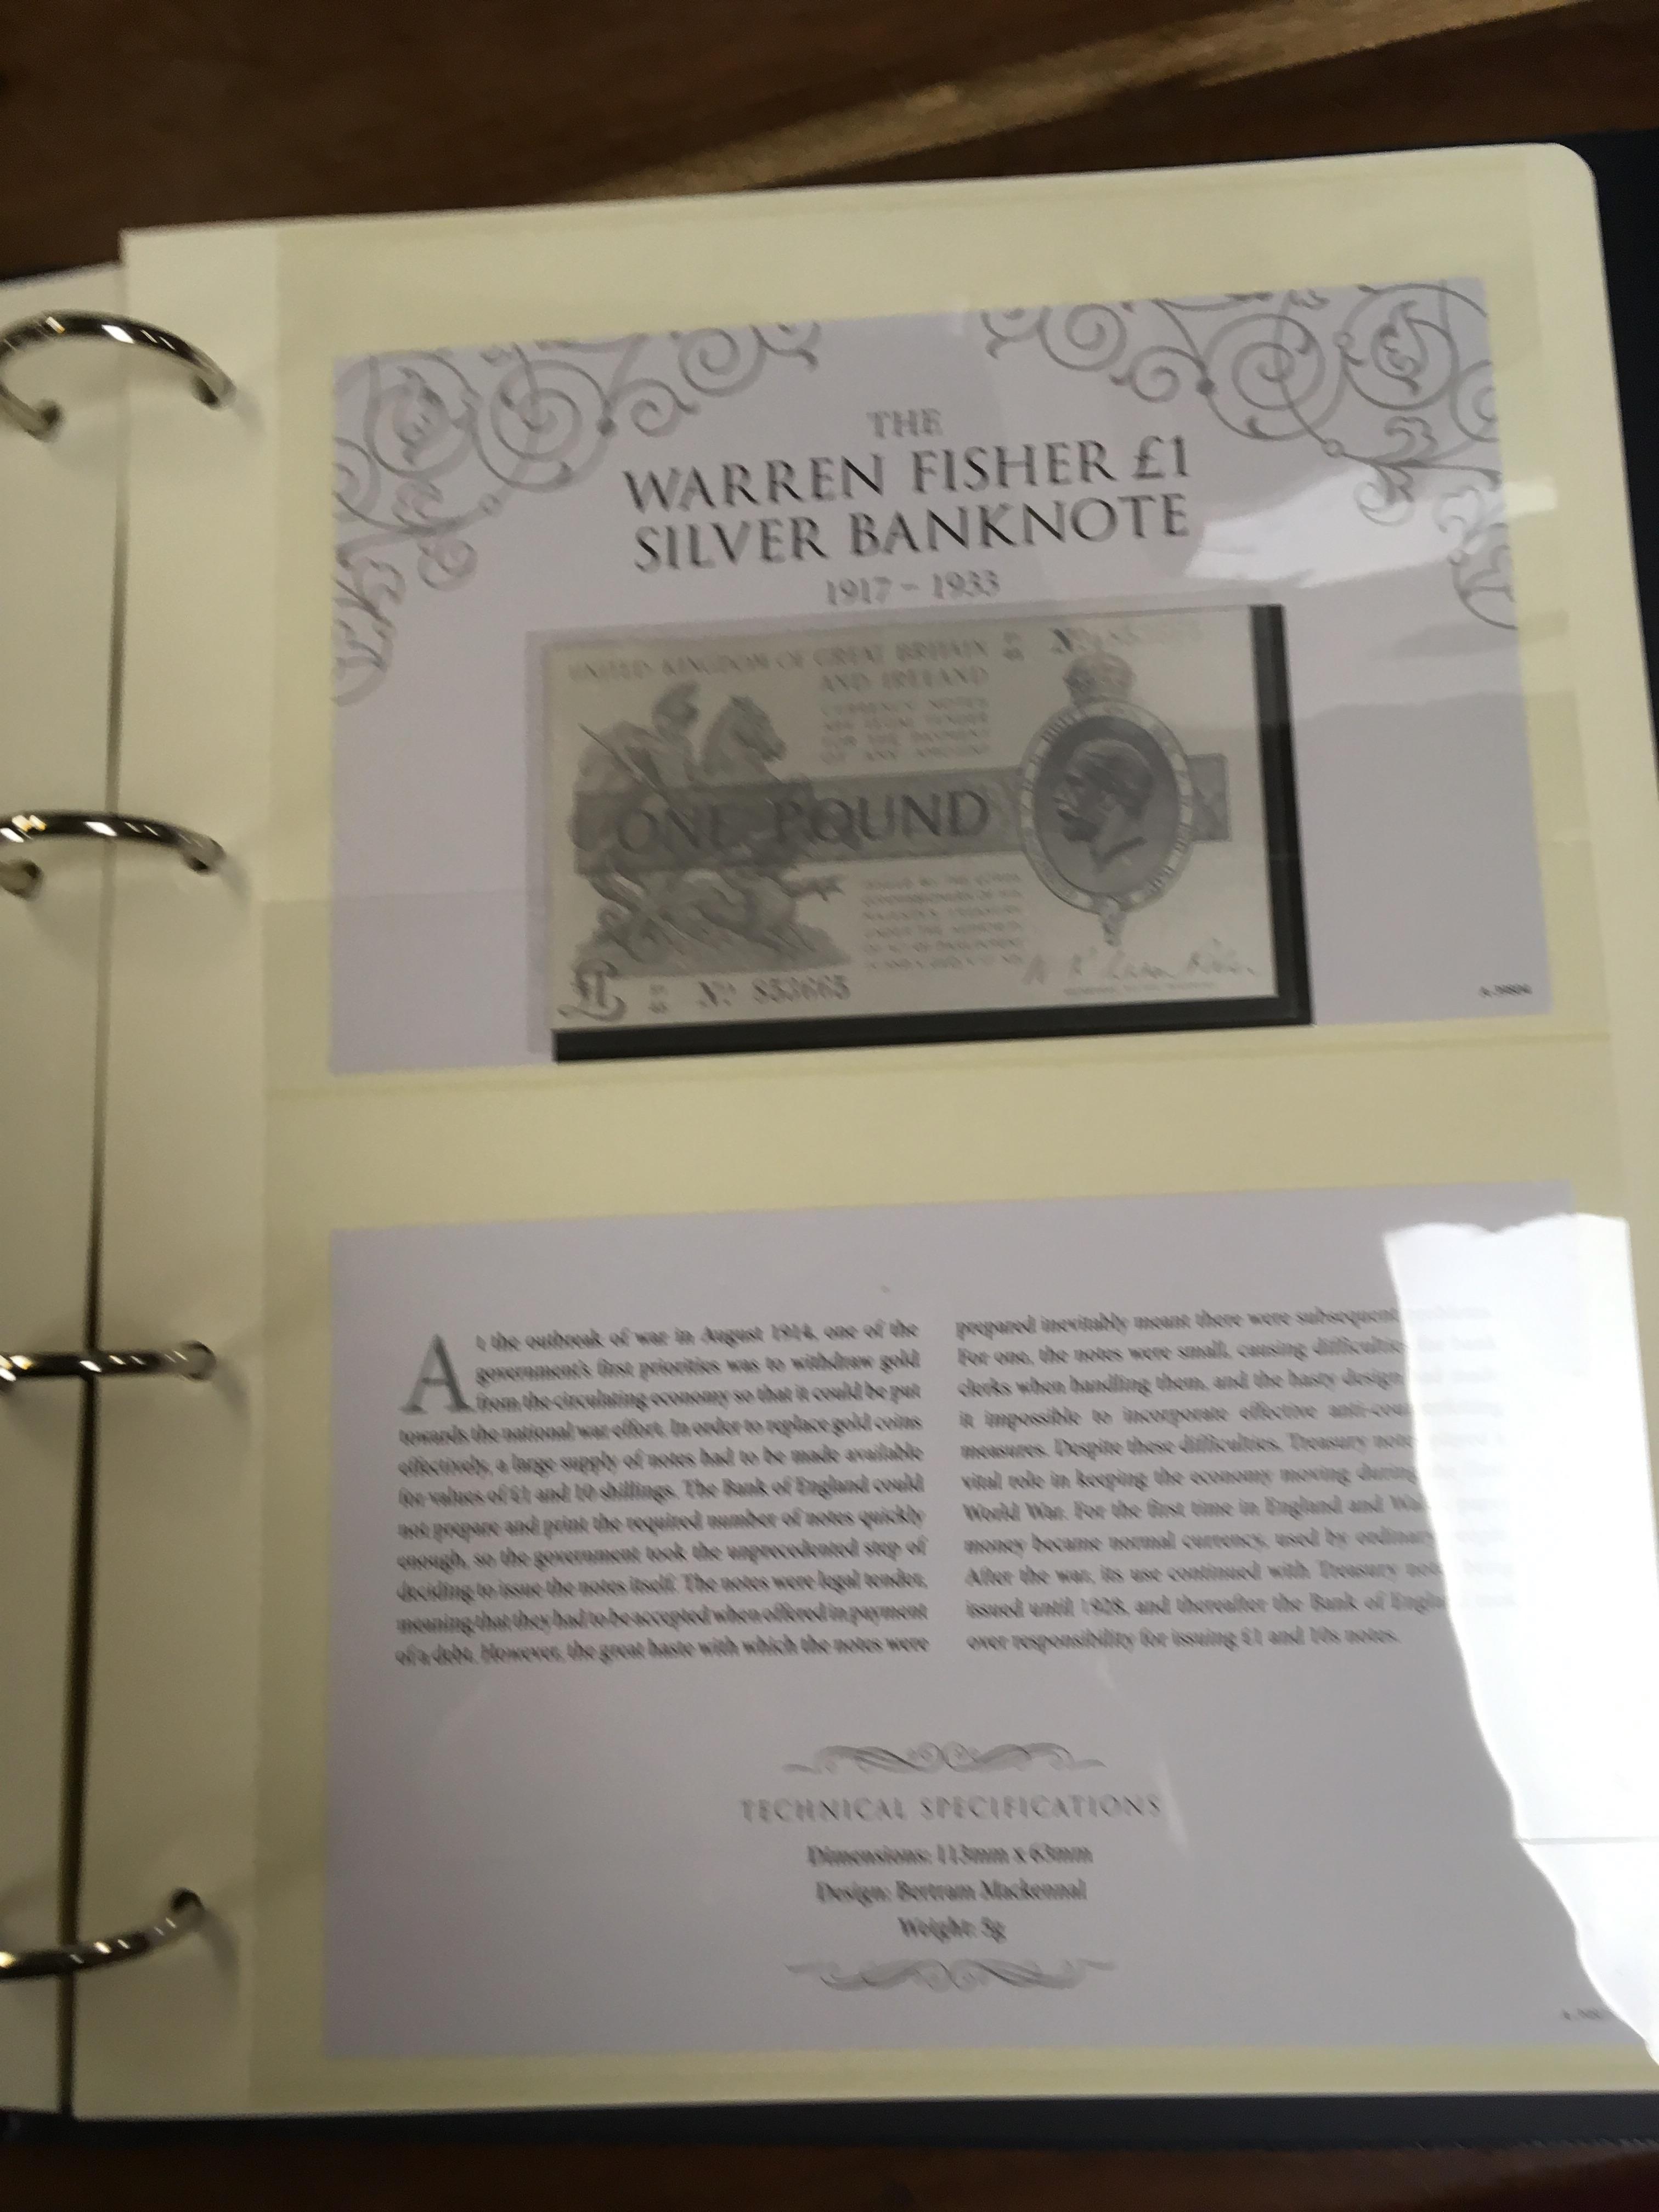 WESTMINSTER "THE HISTORIC SILVER BANKNOTE COLLECTION" IN ALBUM (13 ITEMS). - Image 3 of 4